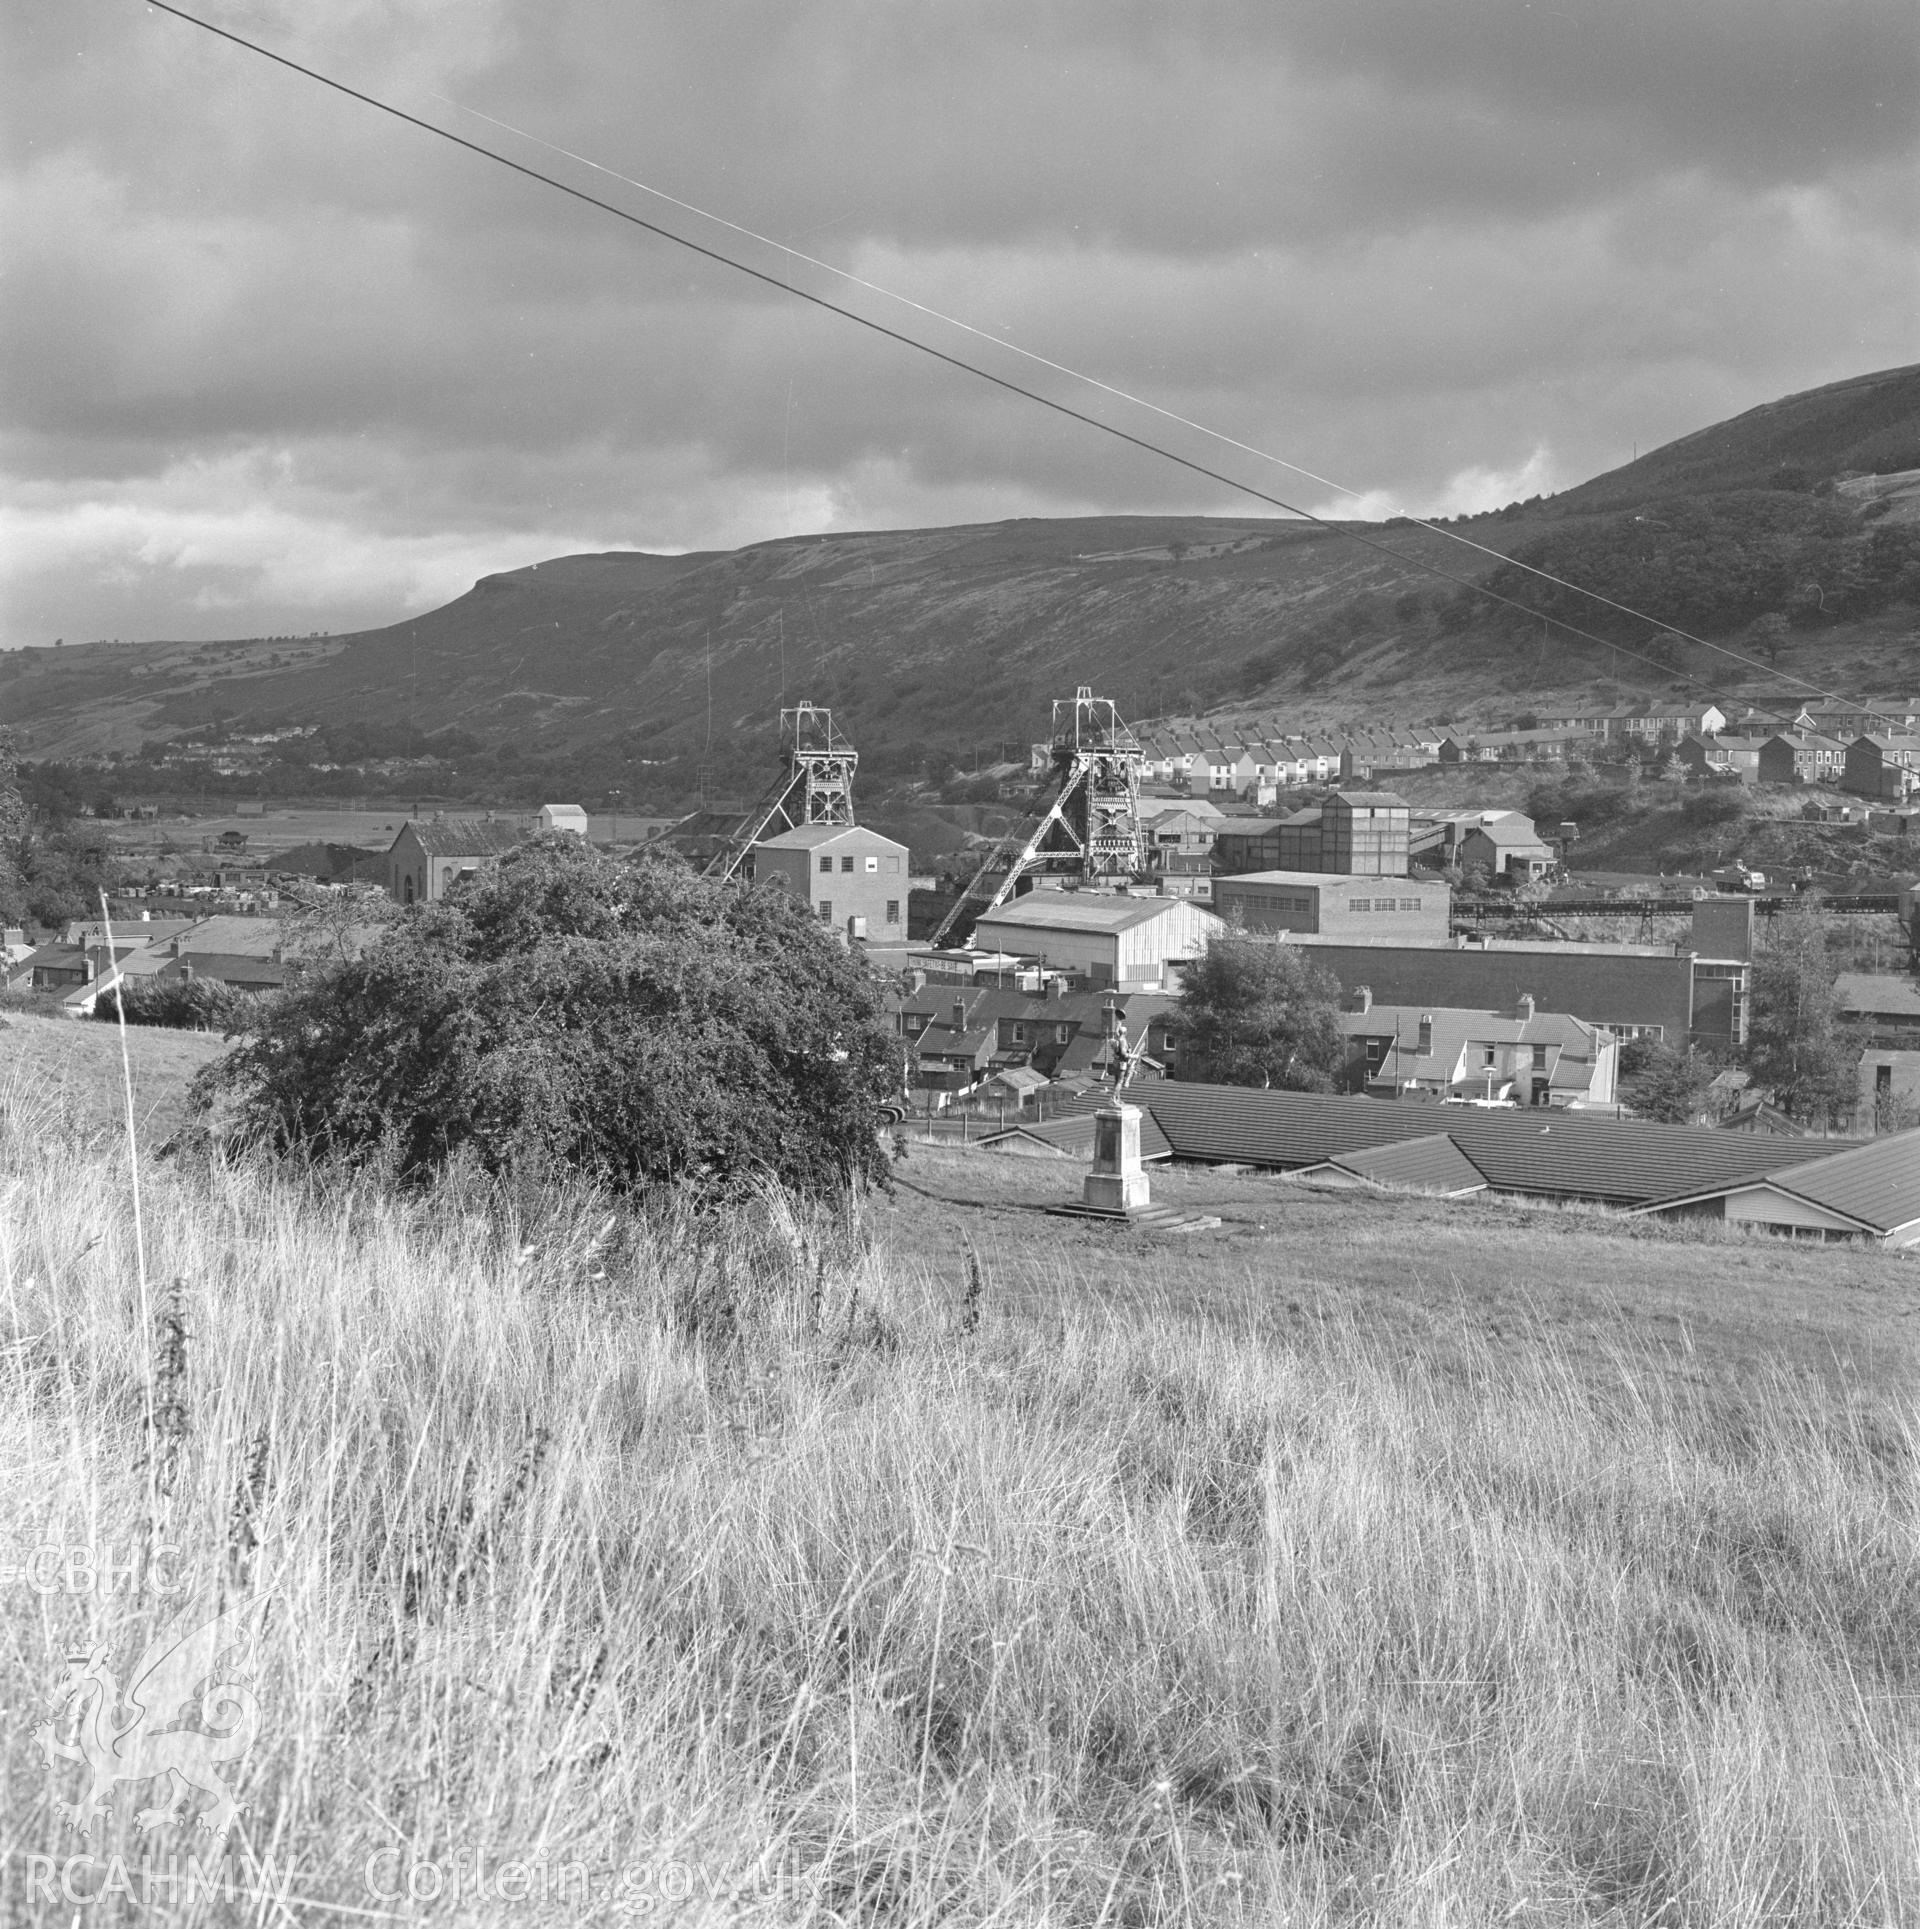 Digital copy of an acetate negative showing general view of Taff Colliery, from the John Cornwell Collection.